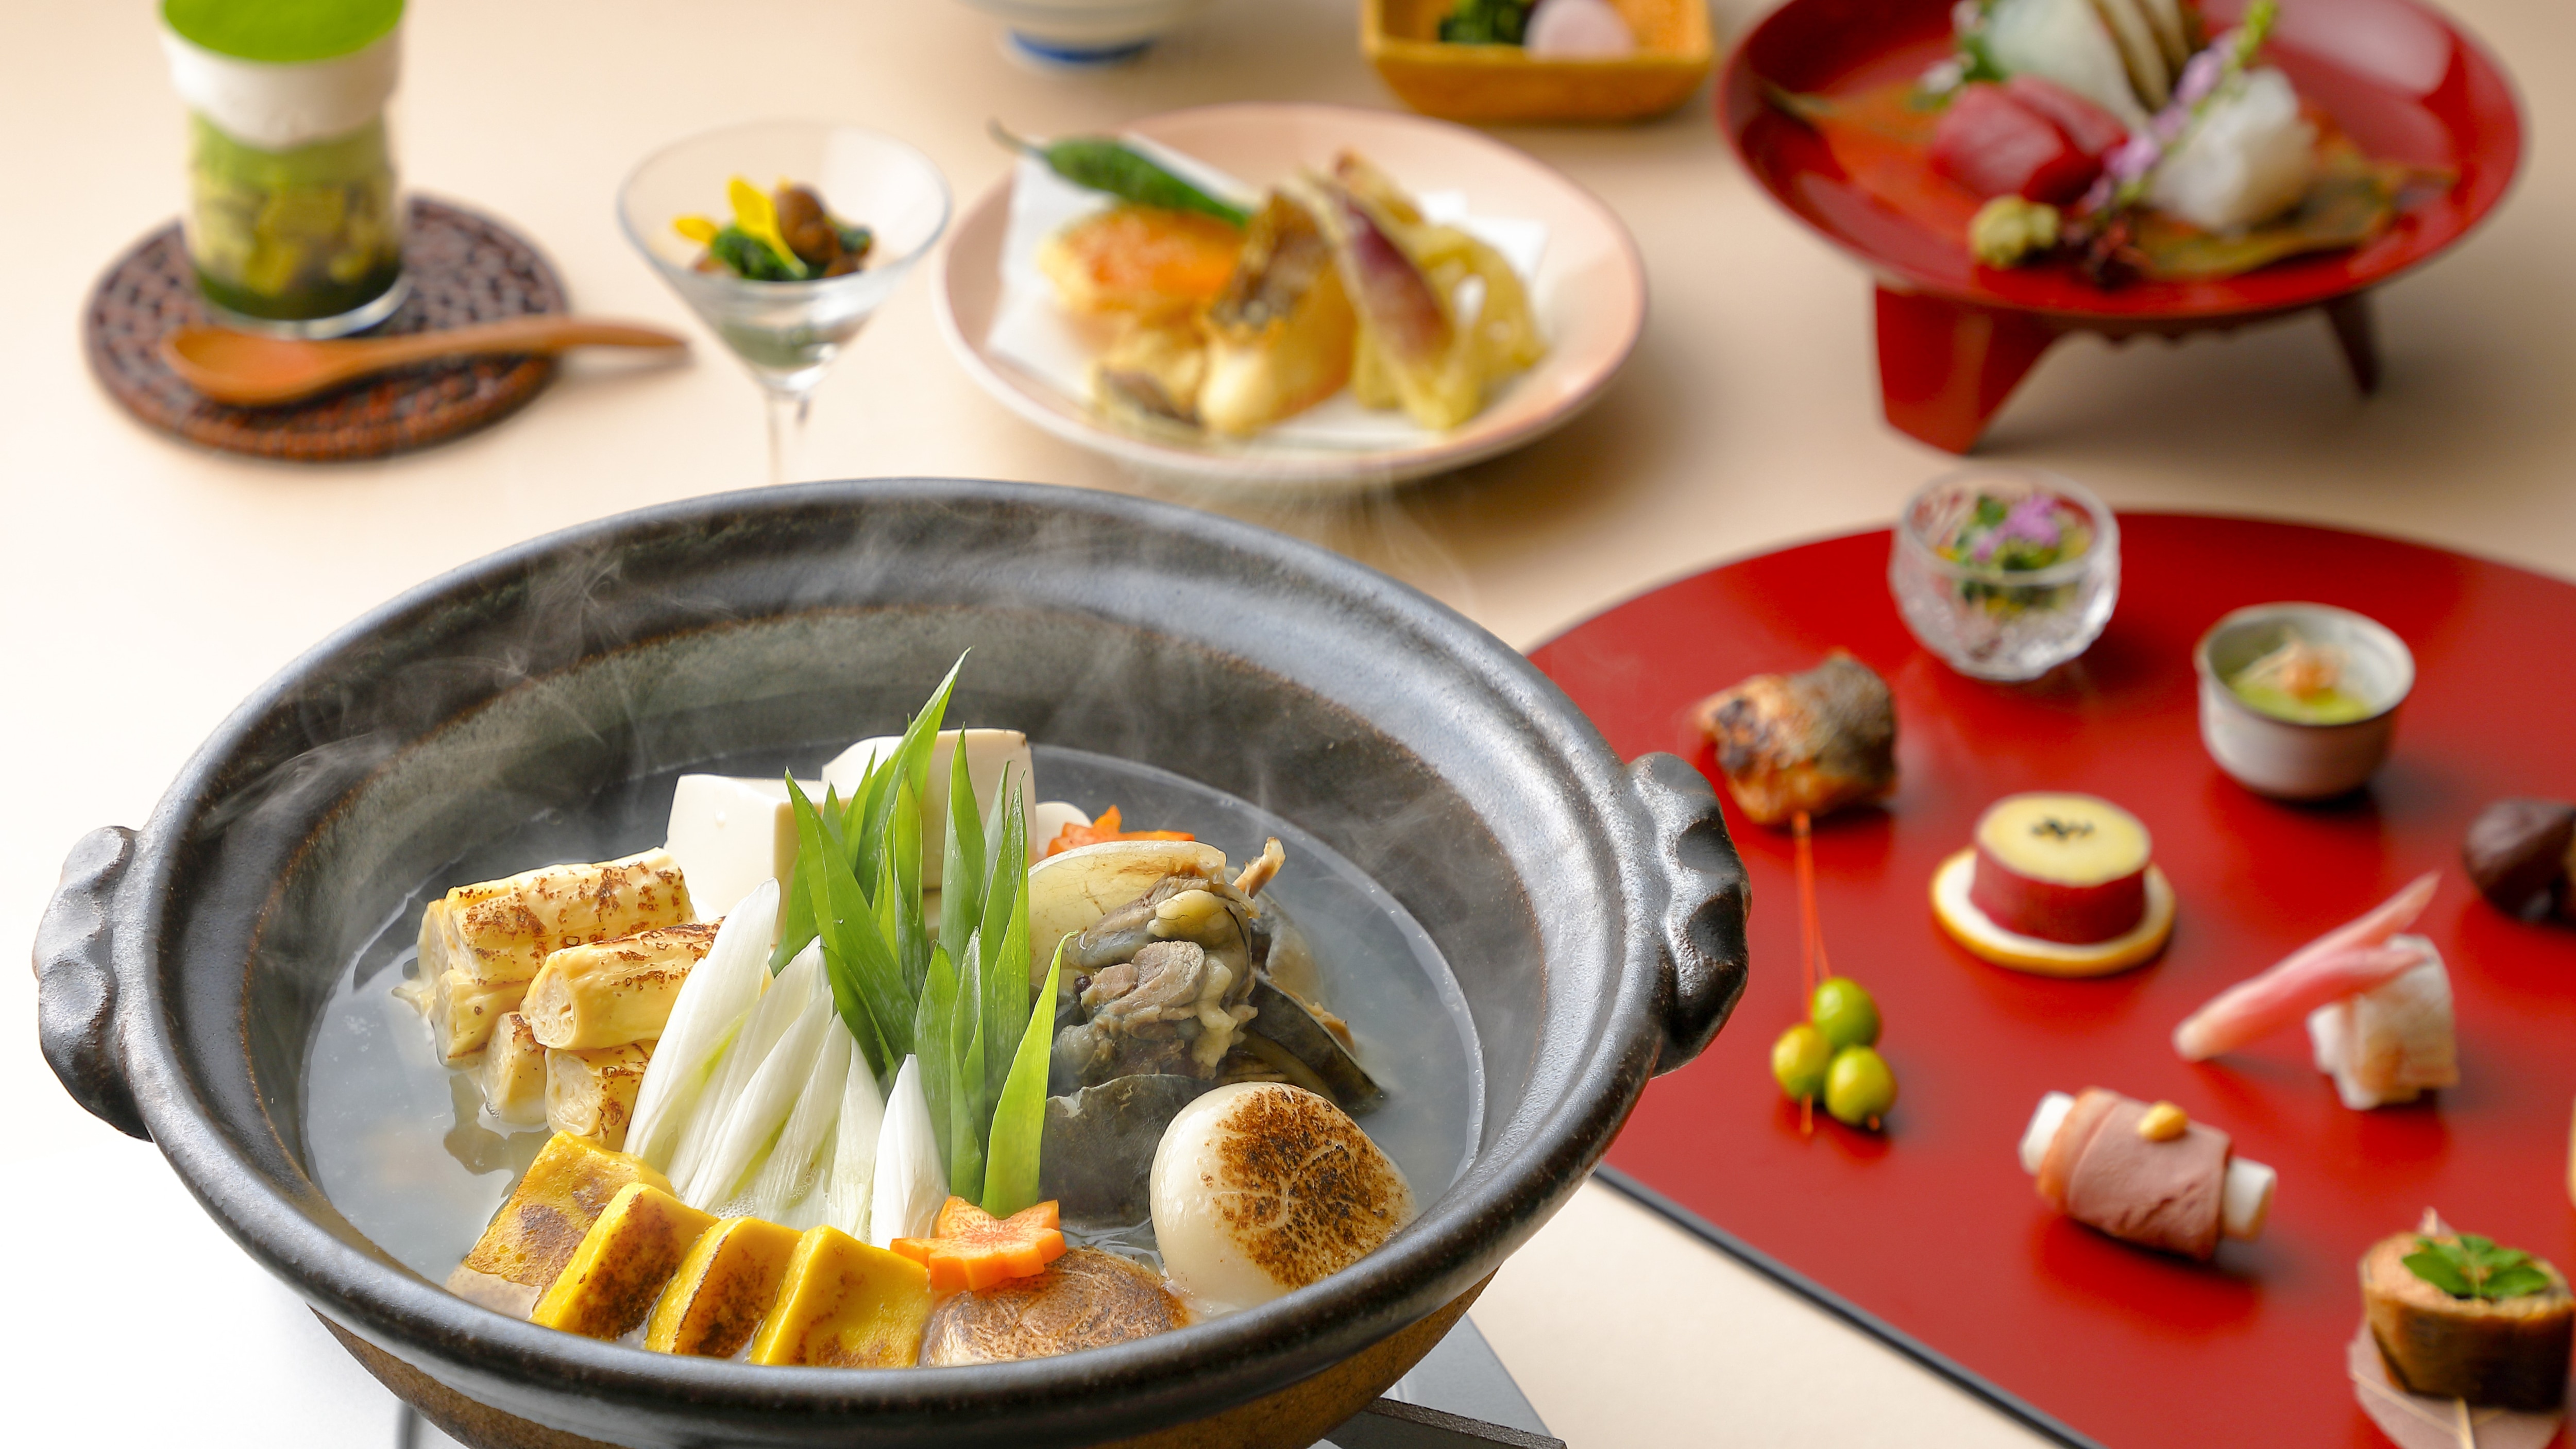 [Dinner] Our prized hot pot and Kyoto kaiseki cuisine with plenty of Kyoto vegetables.